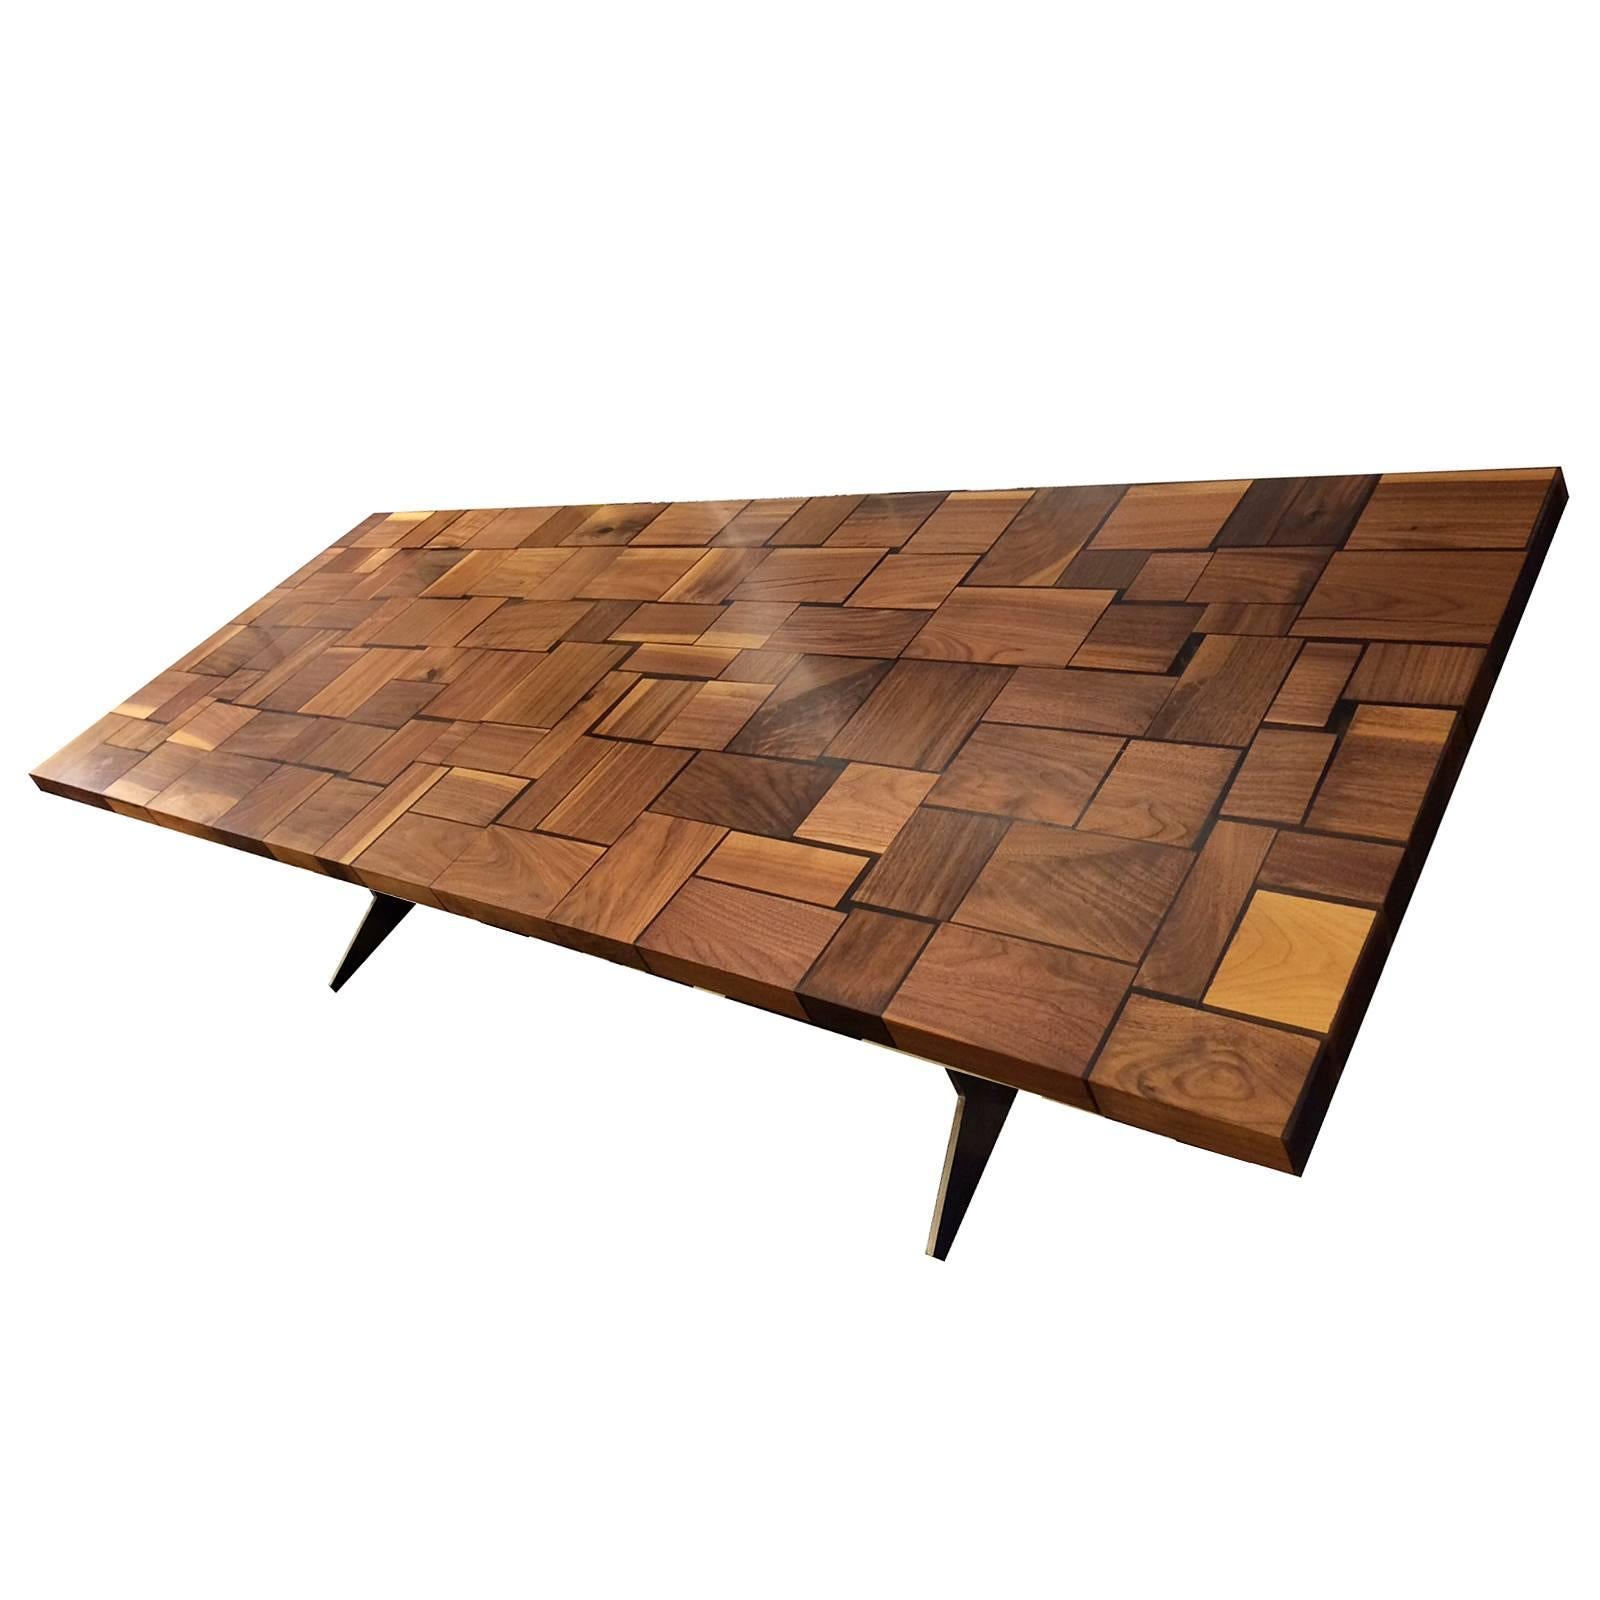 Italian Square Wood Table Squared Blocks of Solid Wood Processed with Resin